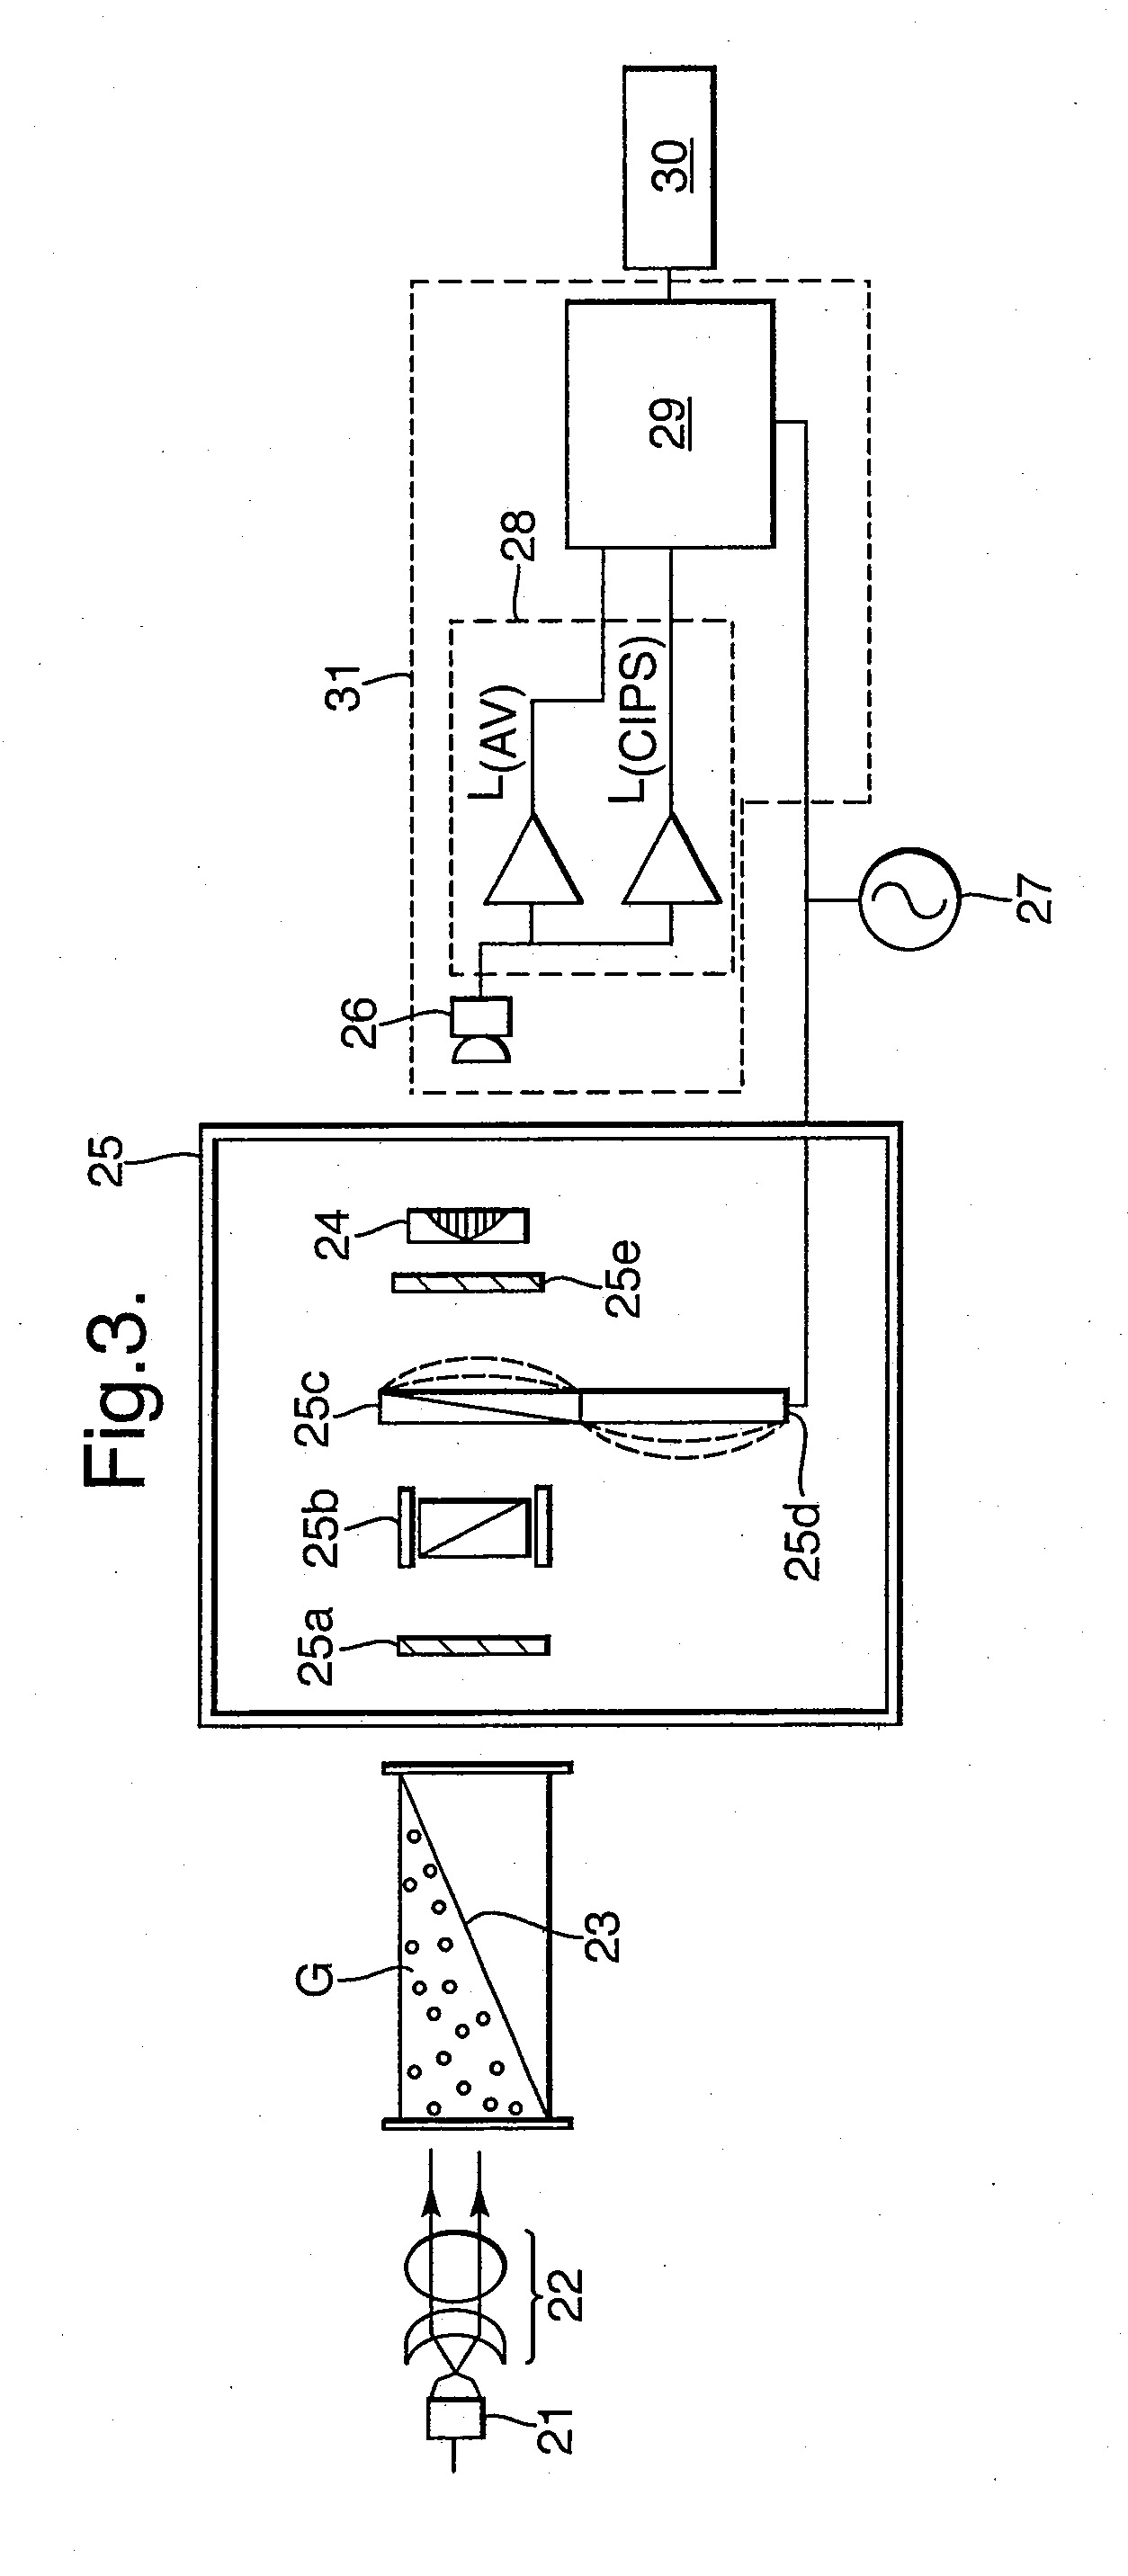 Optical Absorption Spectrometer and Method for Measuring Concentration of a Substance